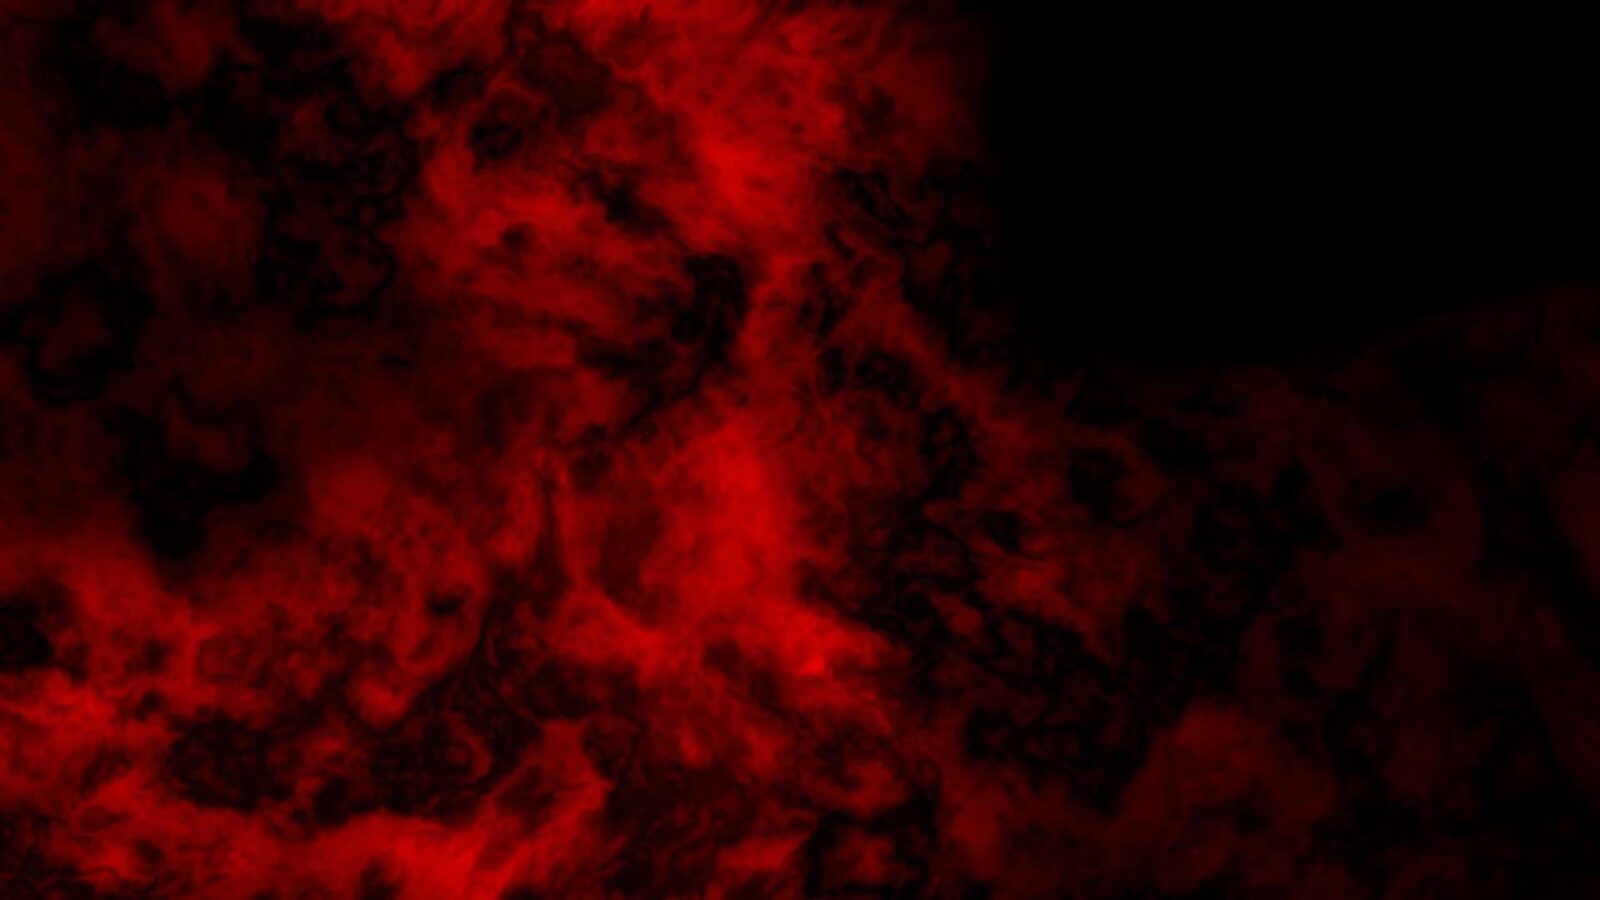 LiveWallpapers4Free.com | Blood Bloody Clouds Fantasy Abstract Art - Free Live Wallpaper